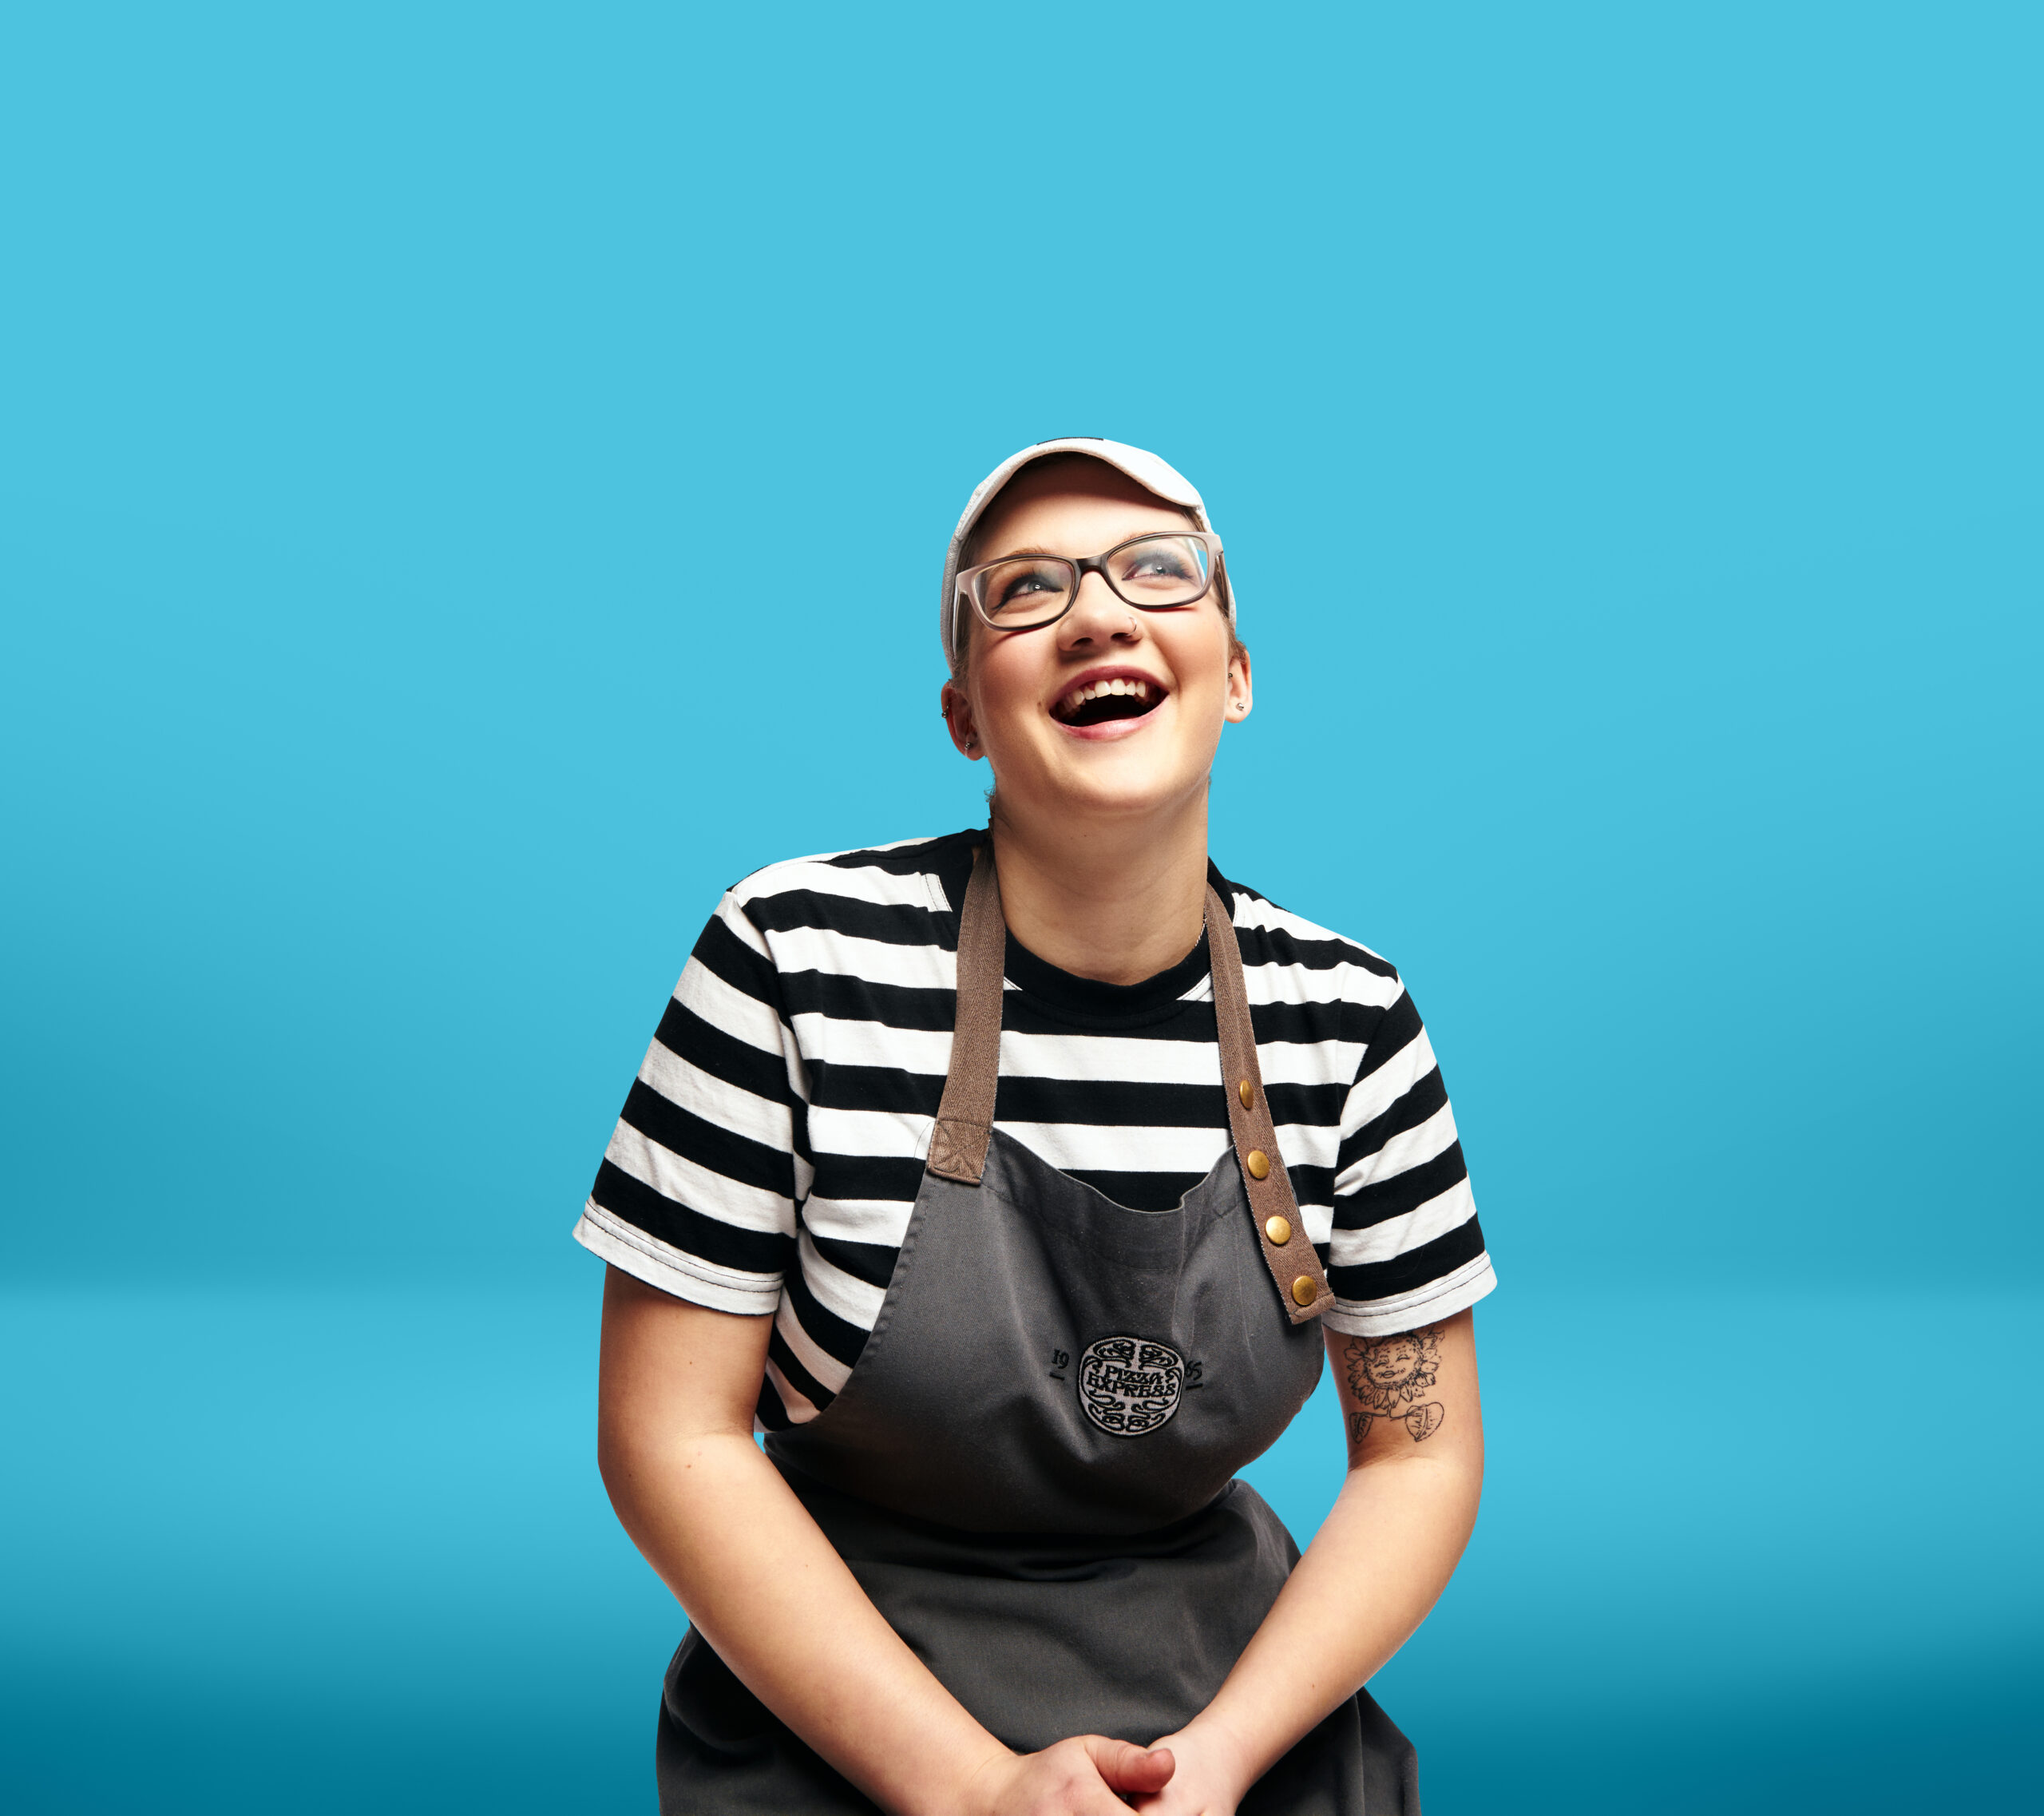 Aiste Kinderyte from PizzaExpress smiling in front of a light blue background